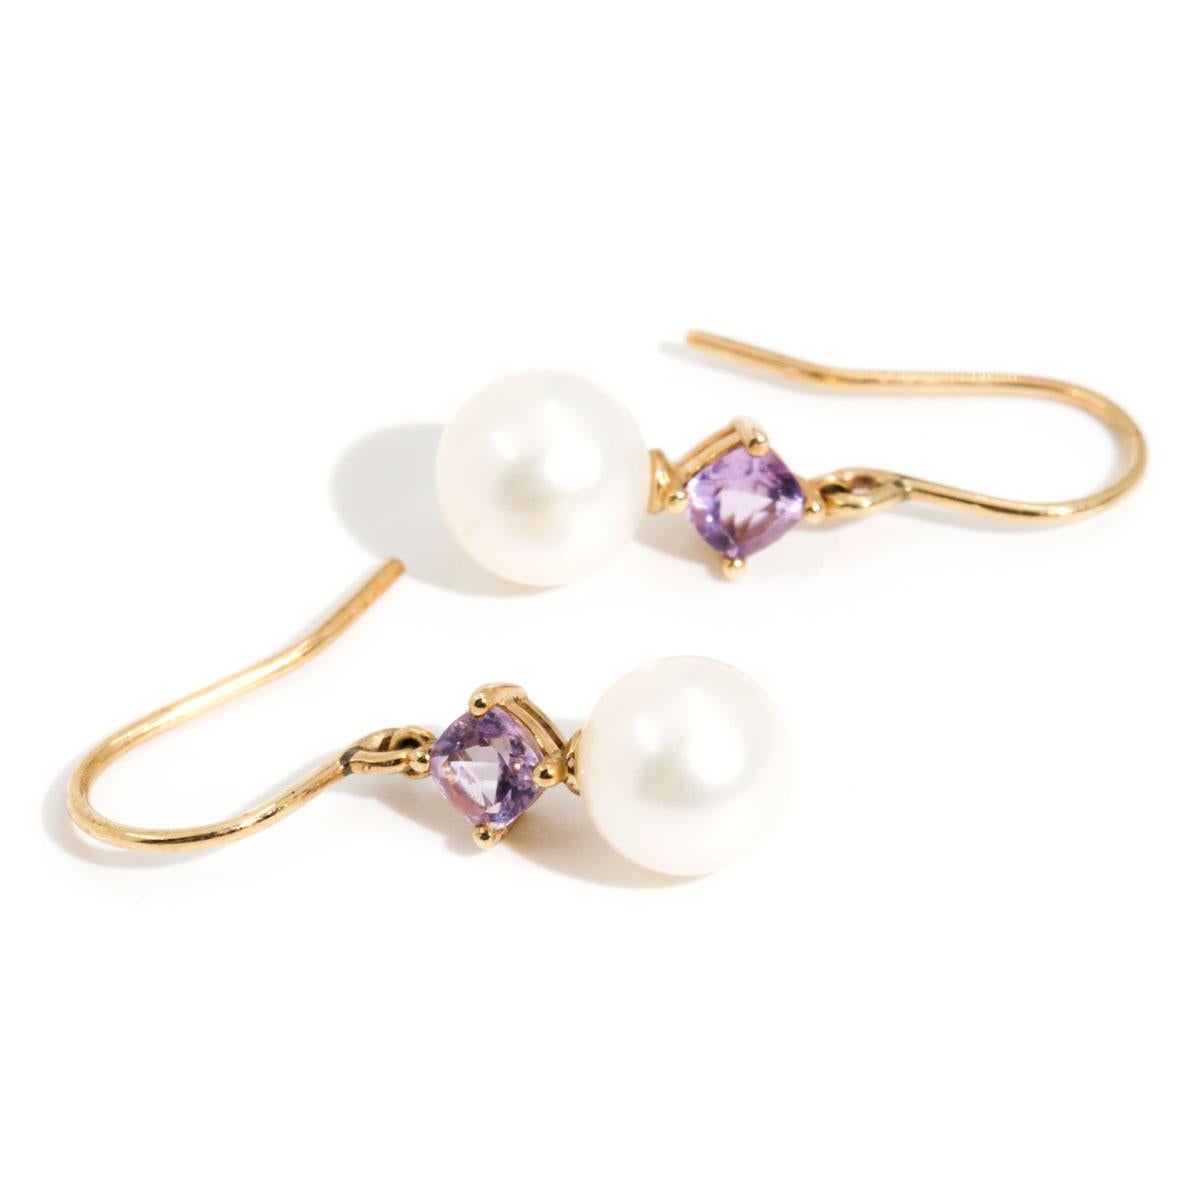 Crafted in 9 carat yellow gold are these vintage drop earrings featuring two gorgeous 7.9 millimetre lustrous freshwater pearls paired with two bright purple cushion cut Amethysts.  We have named these charming vintage earrings the Cassy Earrings.